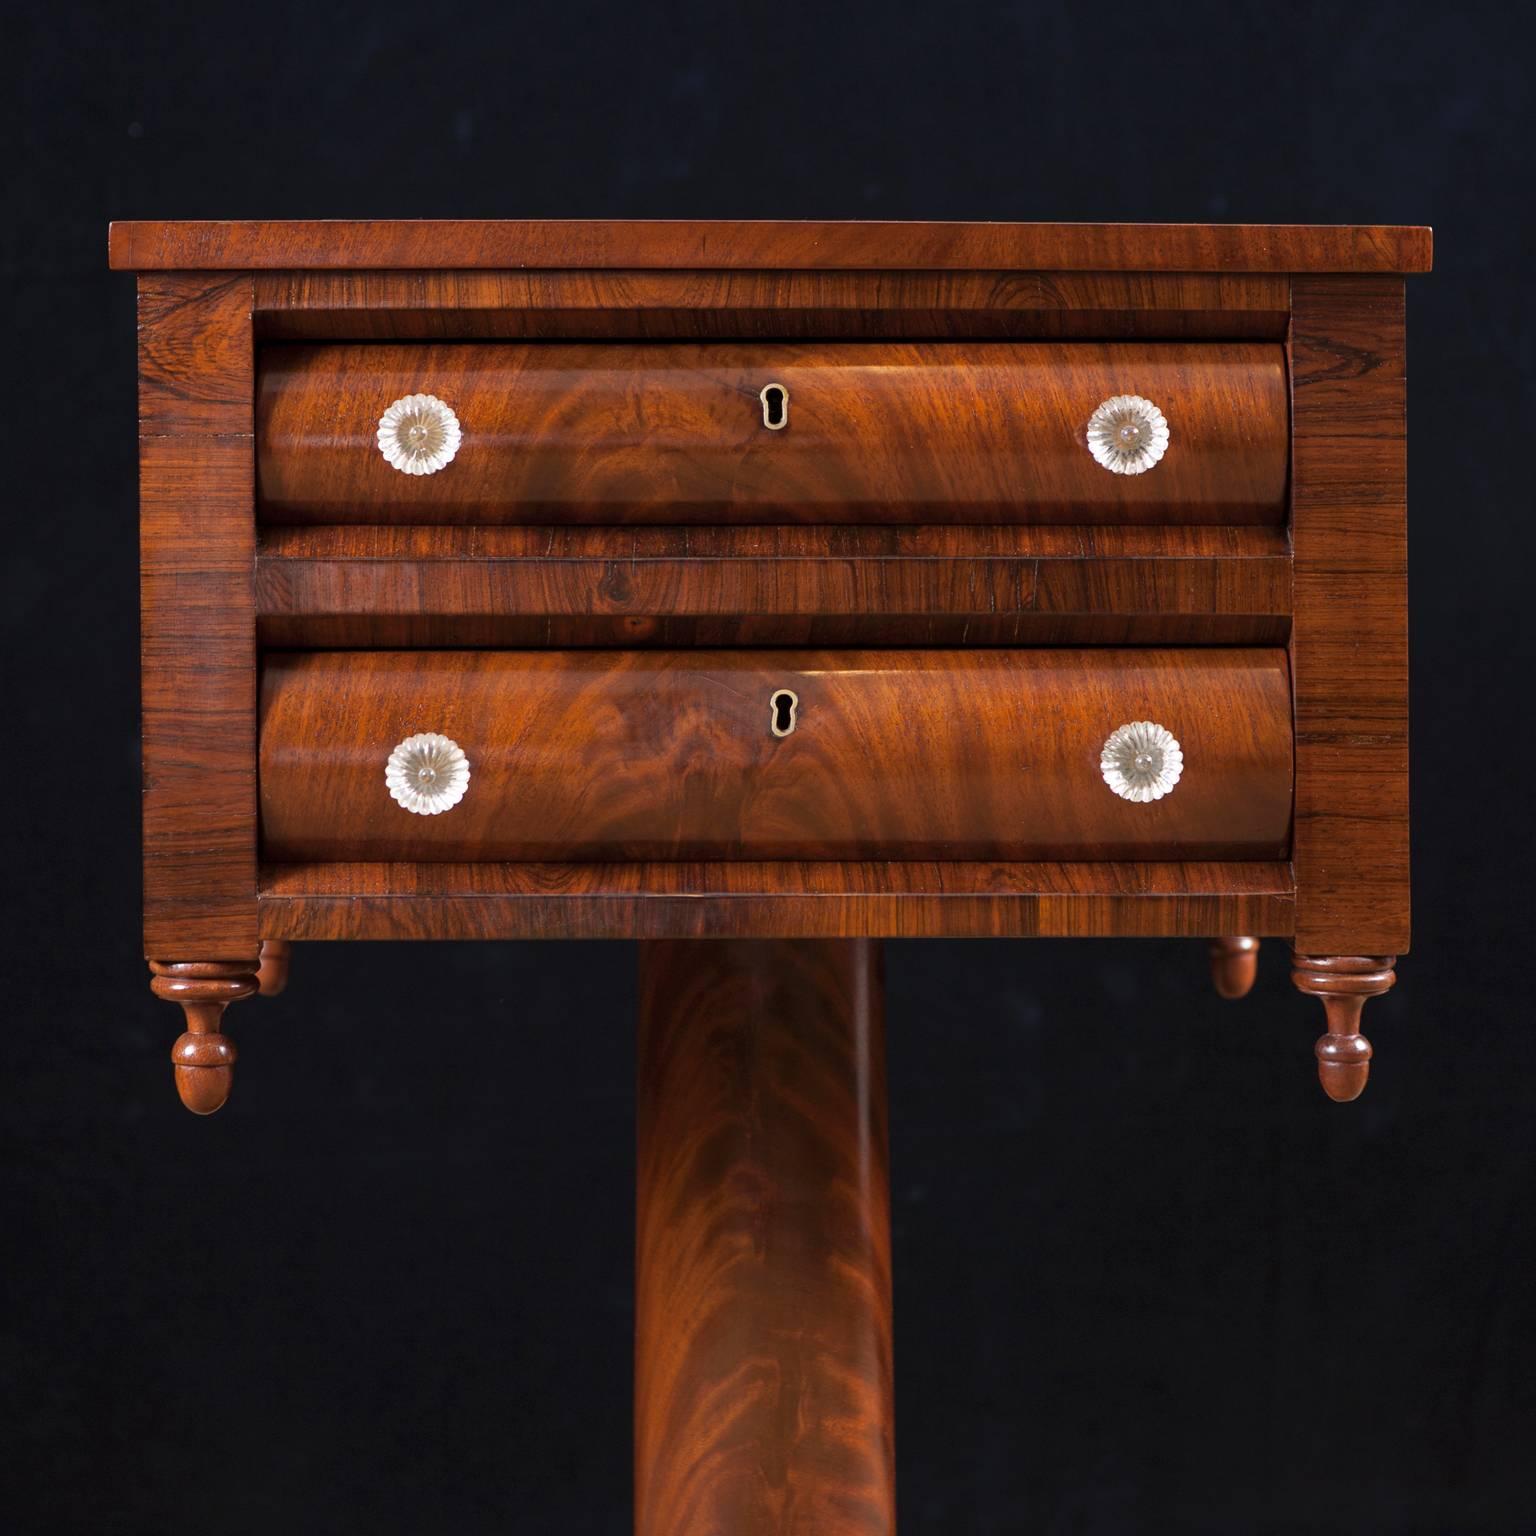 Polished Neoclassical American Empire Side or Lamp Table in Mahogany, circa 1820 For Sale